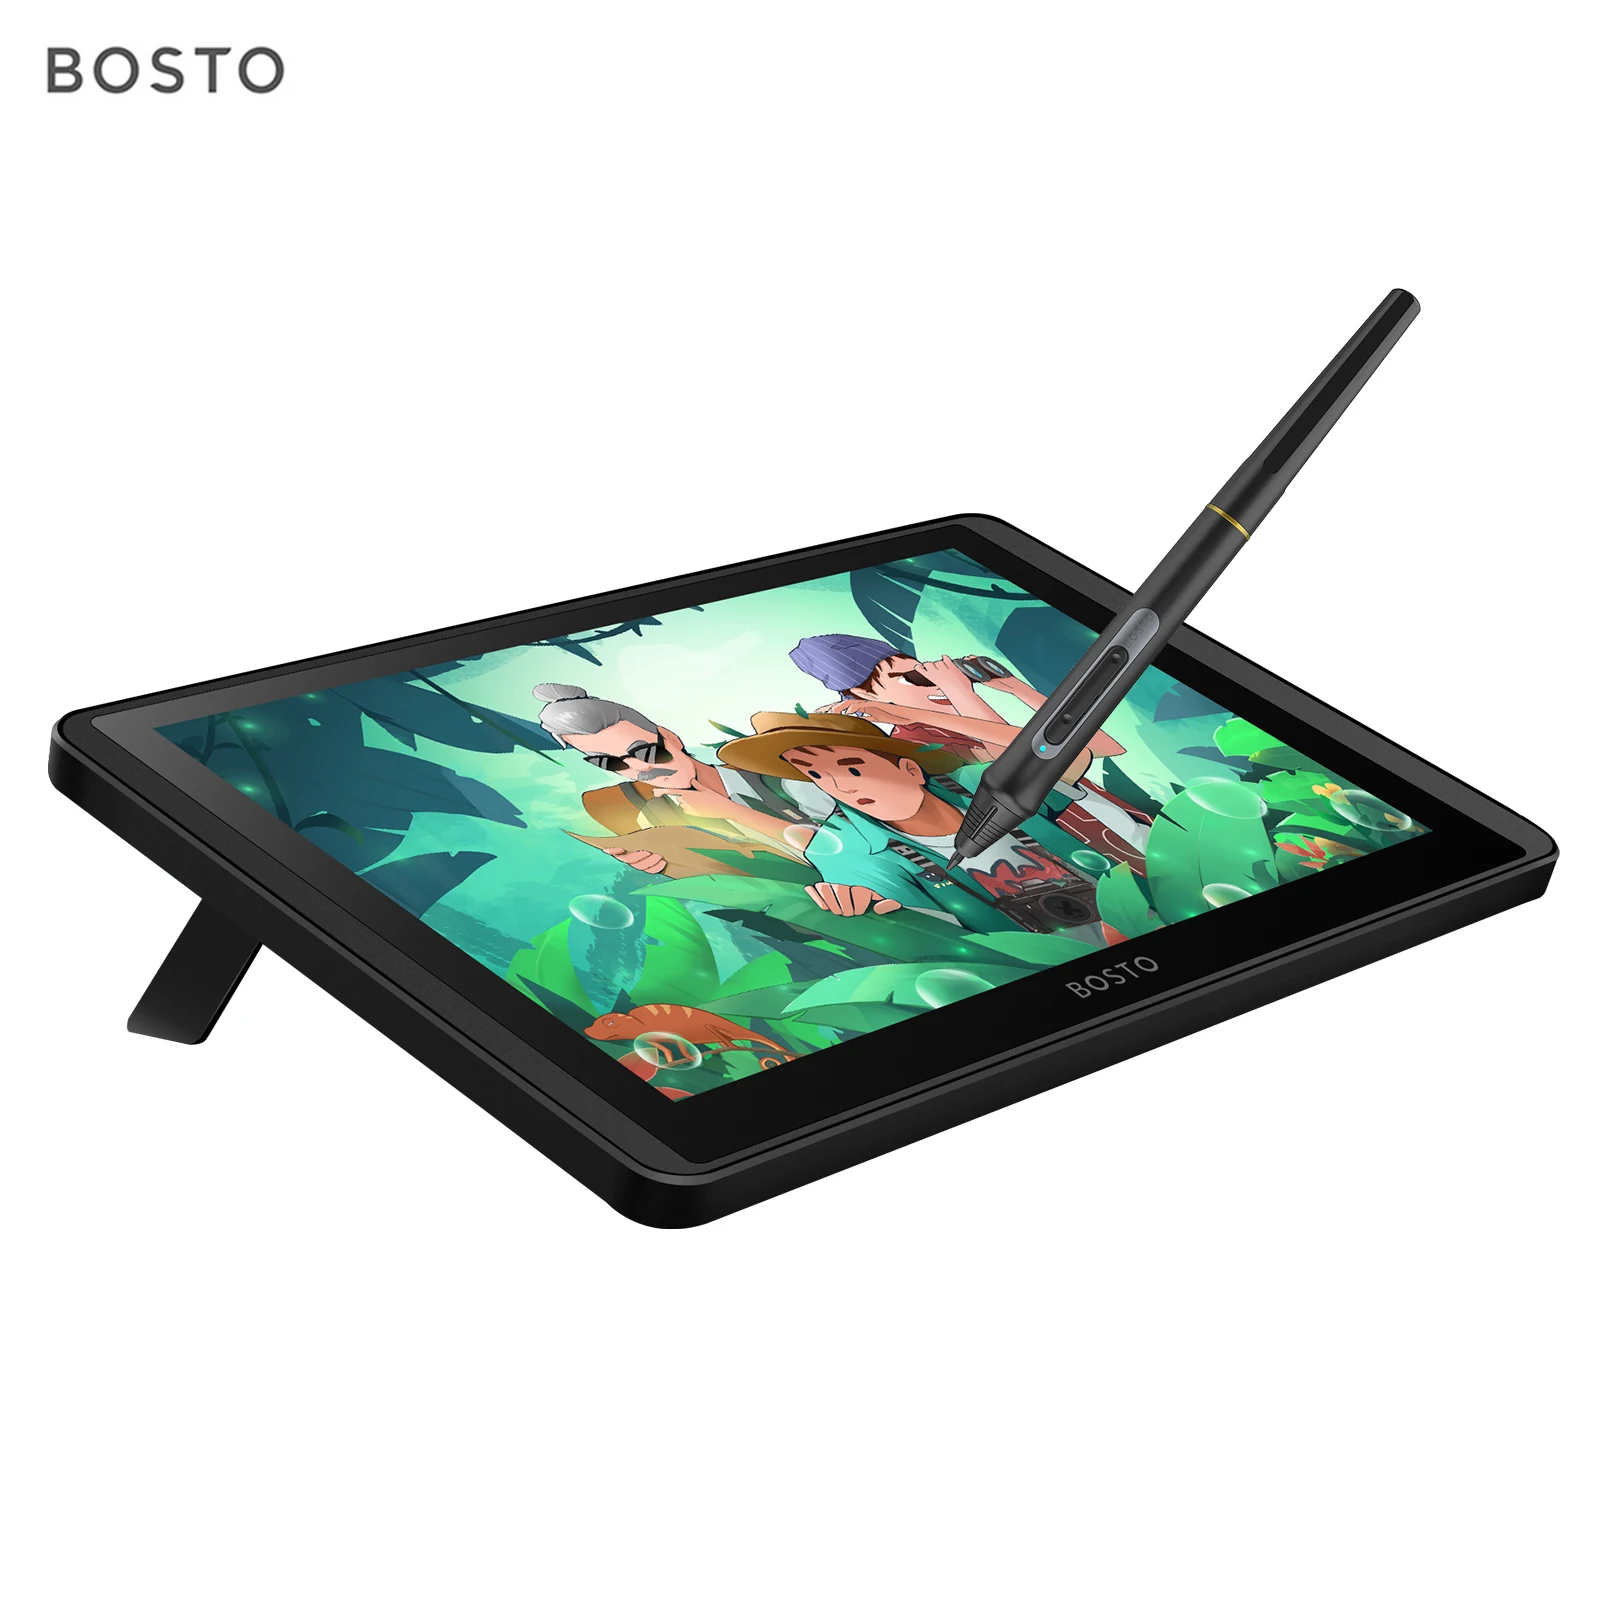 BOSTO 12HD-A H-IPS LCD Graphics Drawing Tablet Monitor 11.6 Inch Size 1366x768 Display 8192 Pressure Level Passive Technology